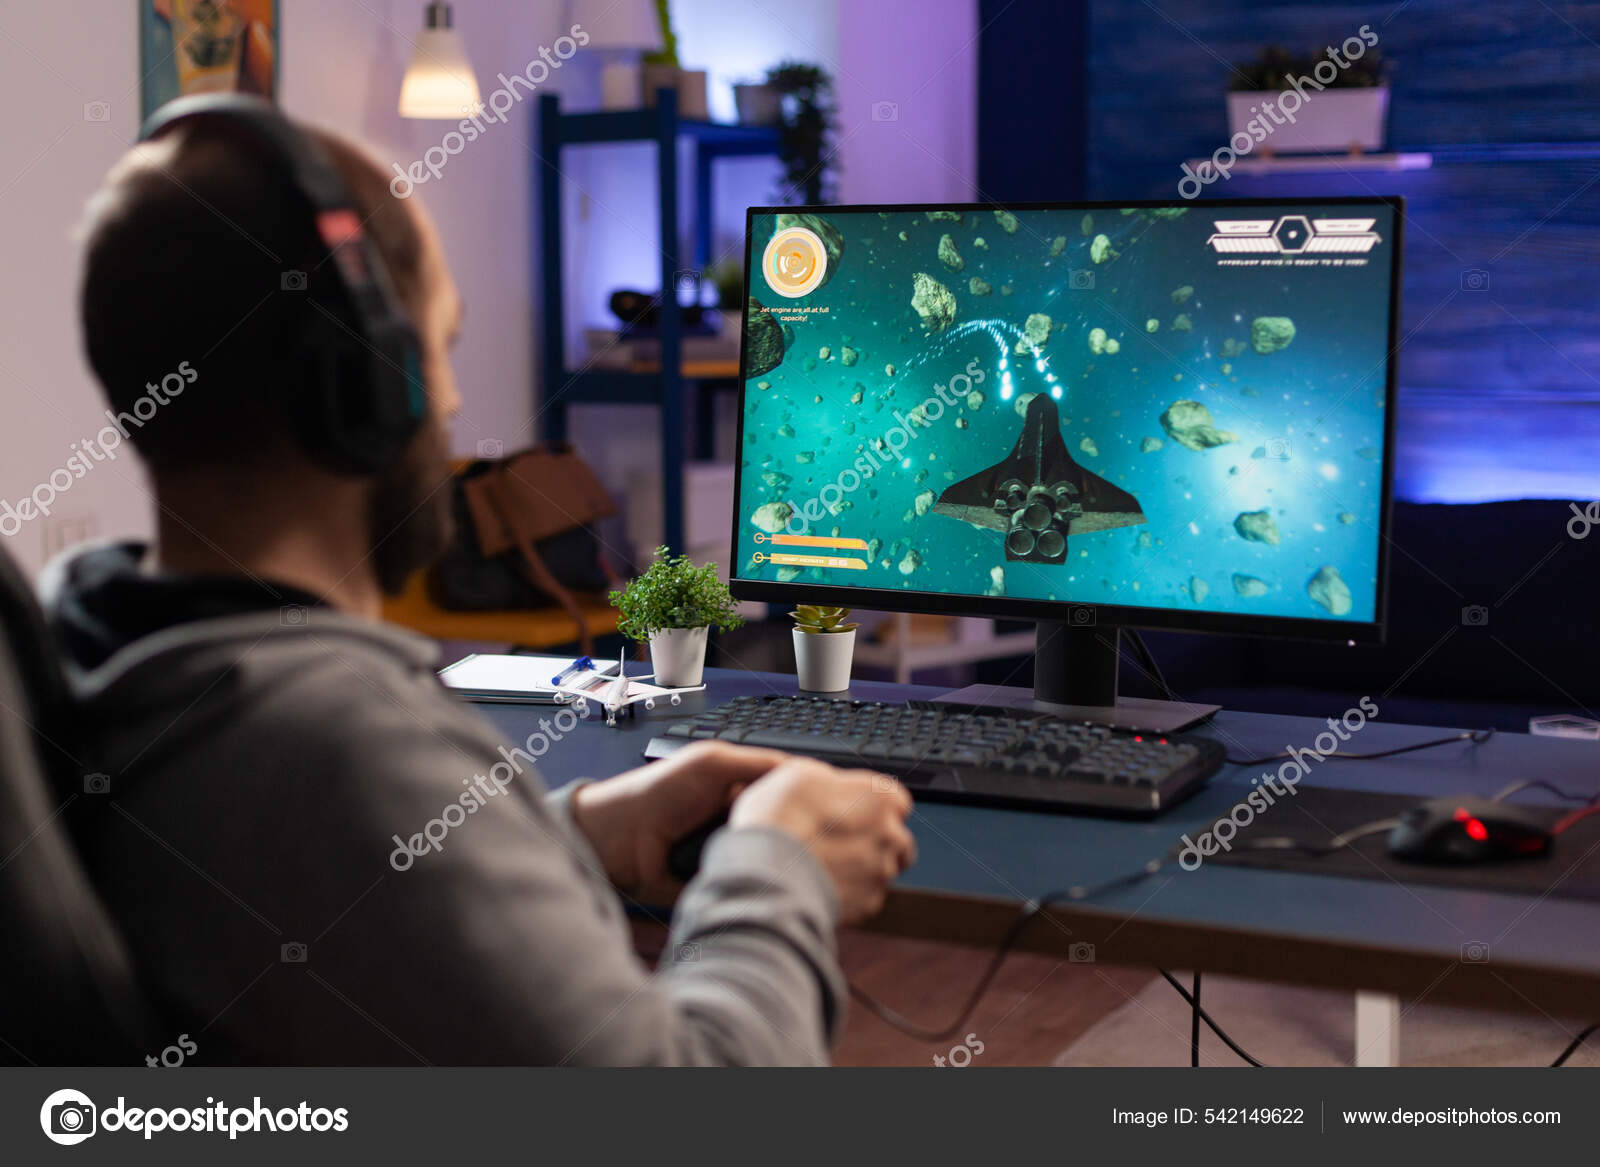 Free Photo  Player winning video games with controller and headset in  front of monitor. man using joystick and headphones, playing online games  on computer. person celebrating game win for leisure.